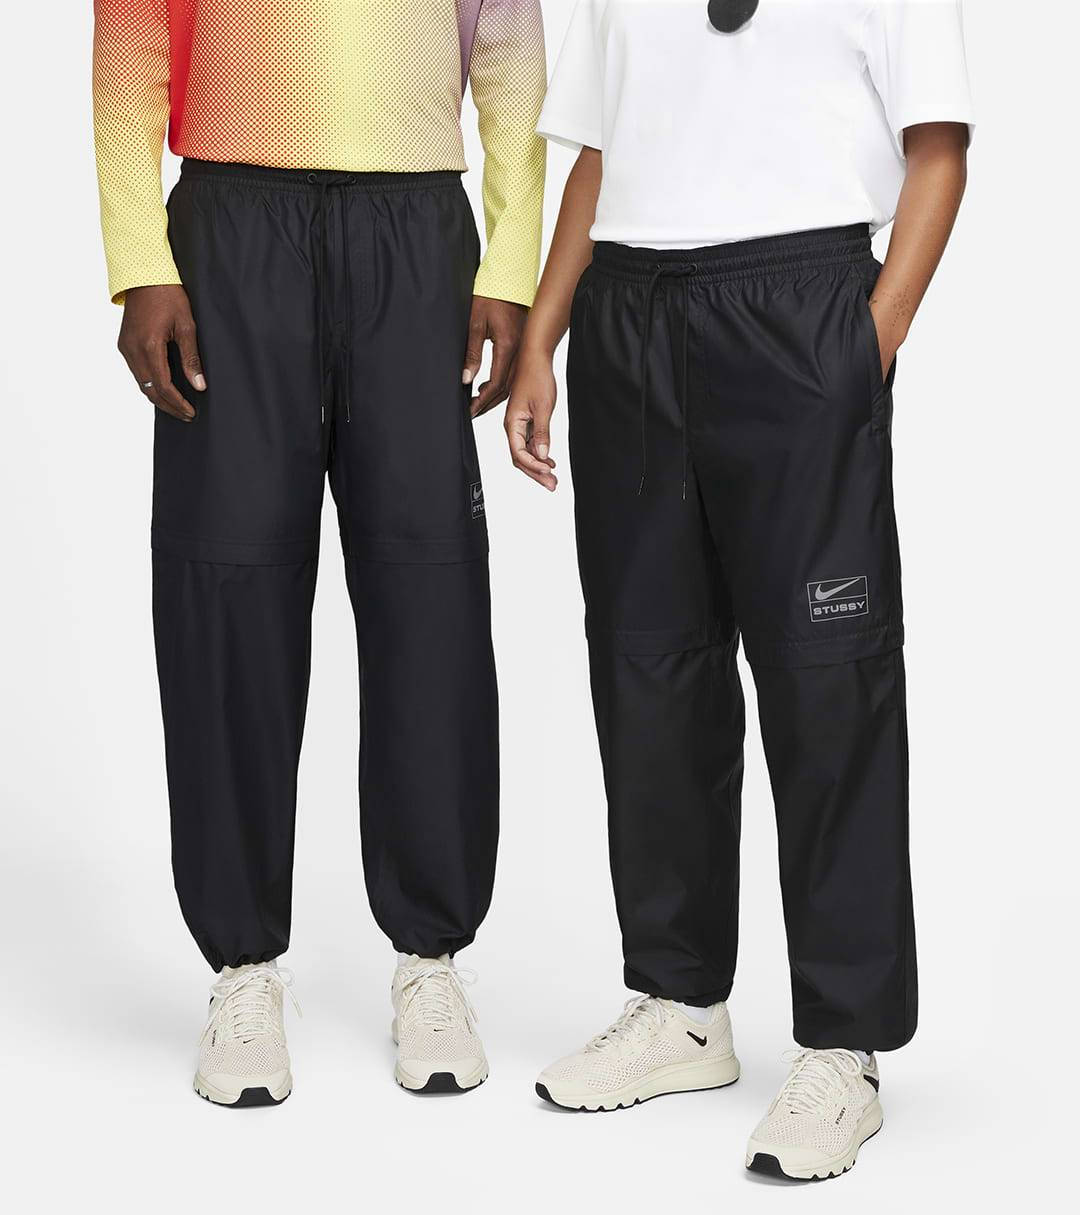 Nike Storm-FIT x Stussy Trousers